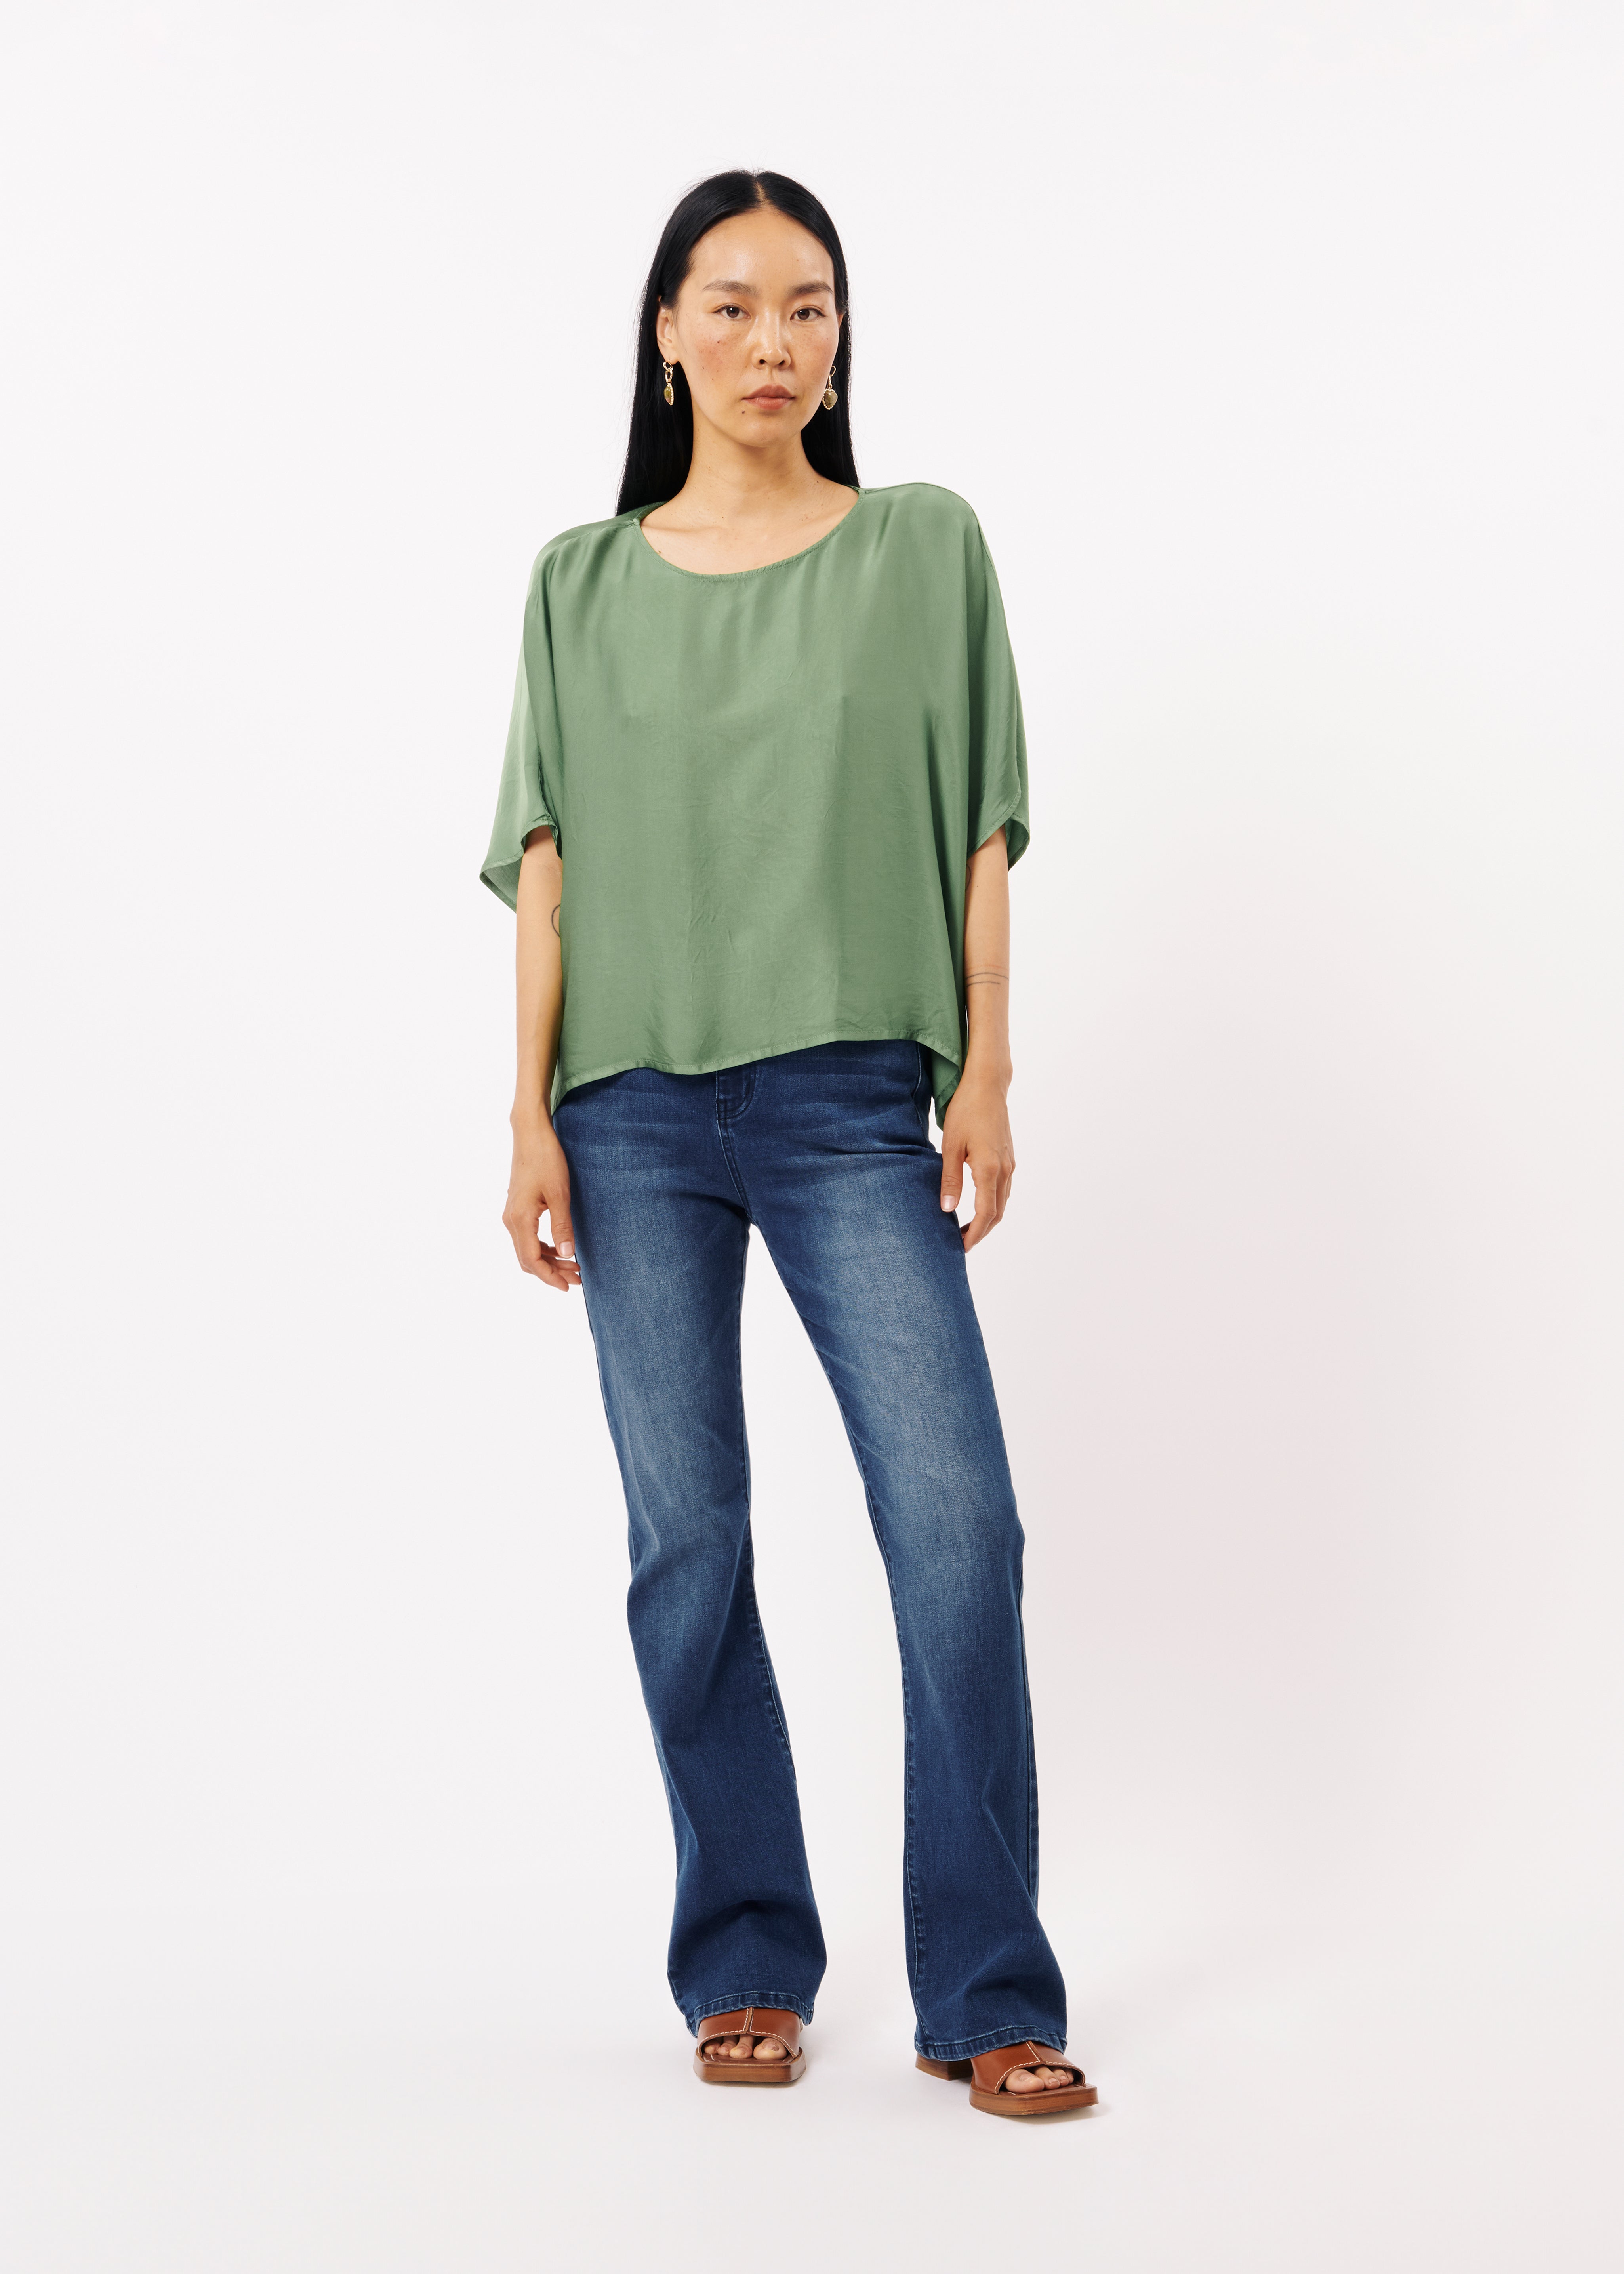 SIA Olive Top